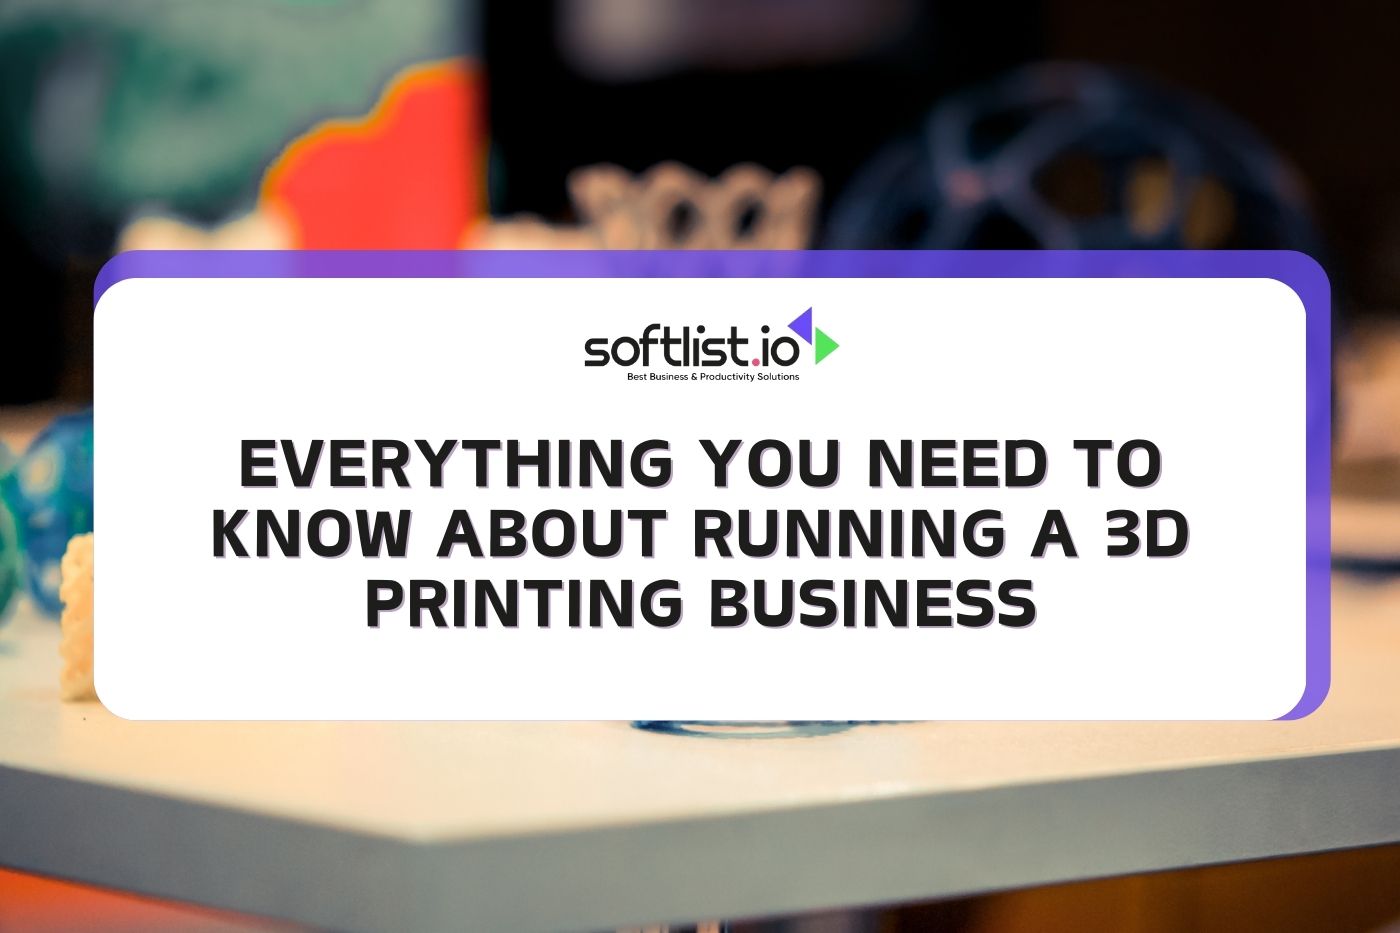 Everything You Need to Know About Running a 3D Printing Business